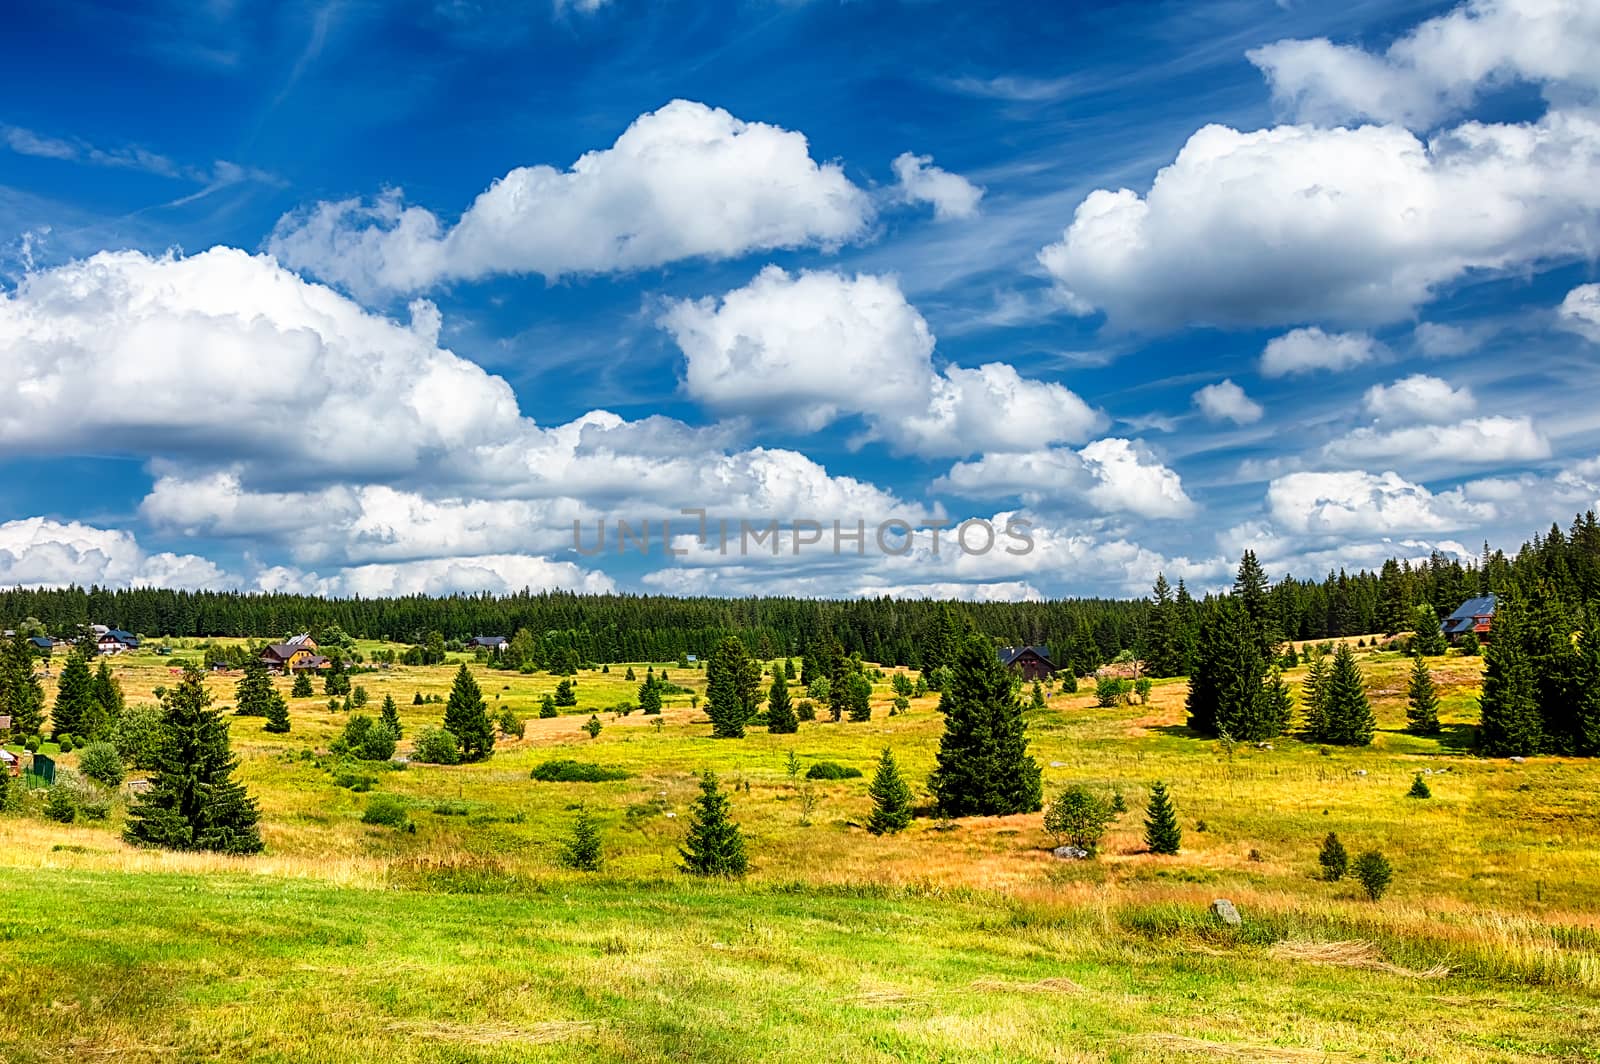 Summer Majestic mountains green grass field and blue sky with the incredible clouds